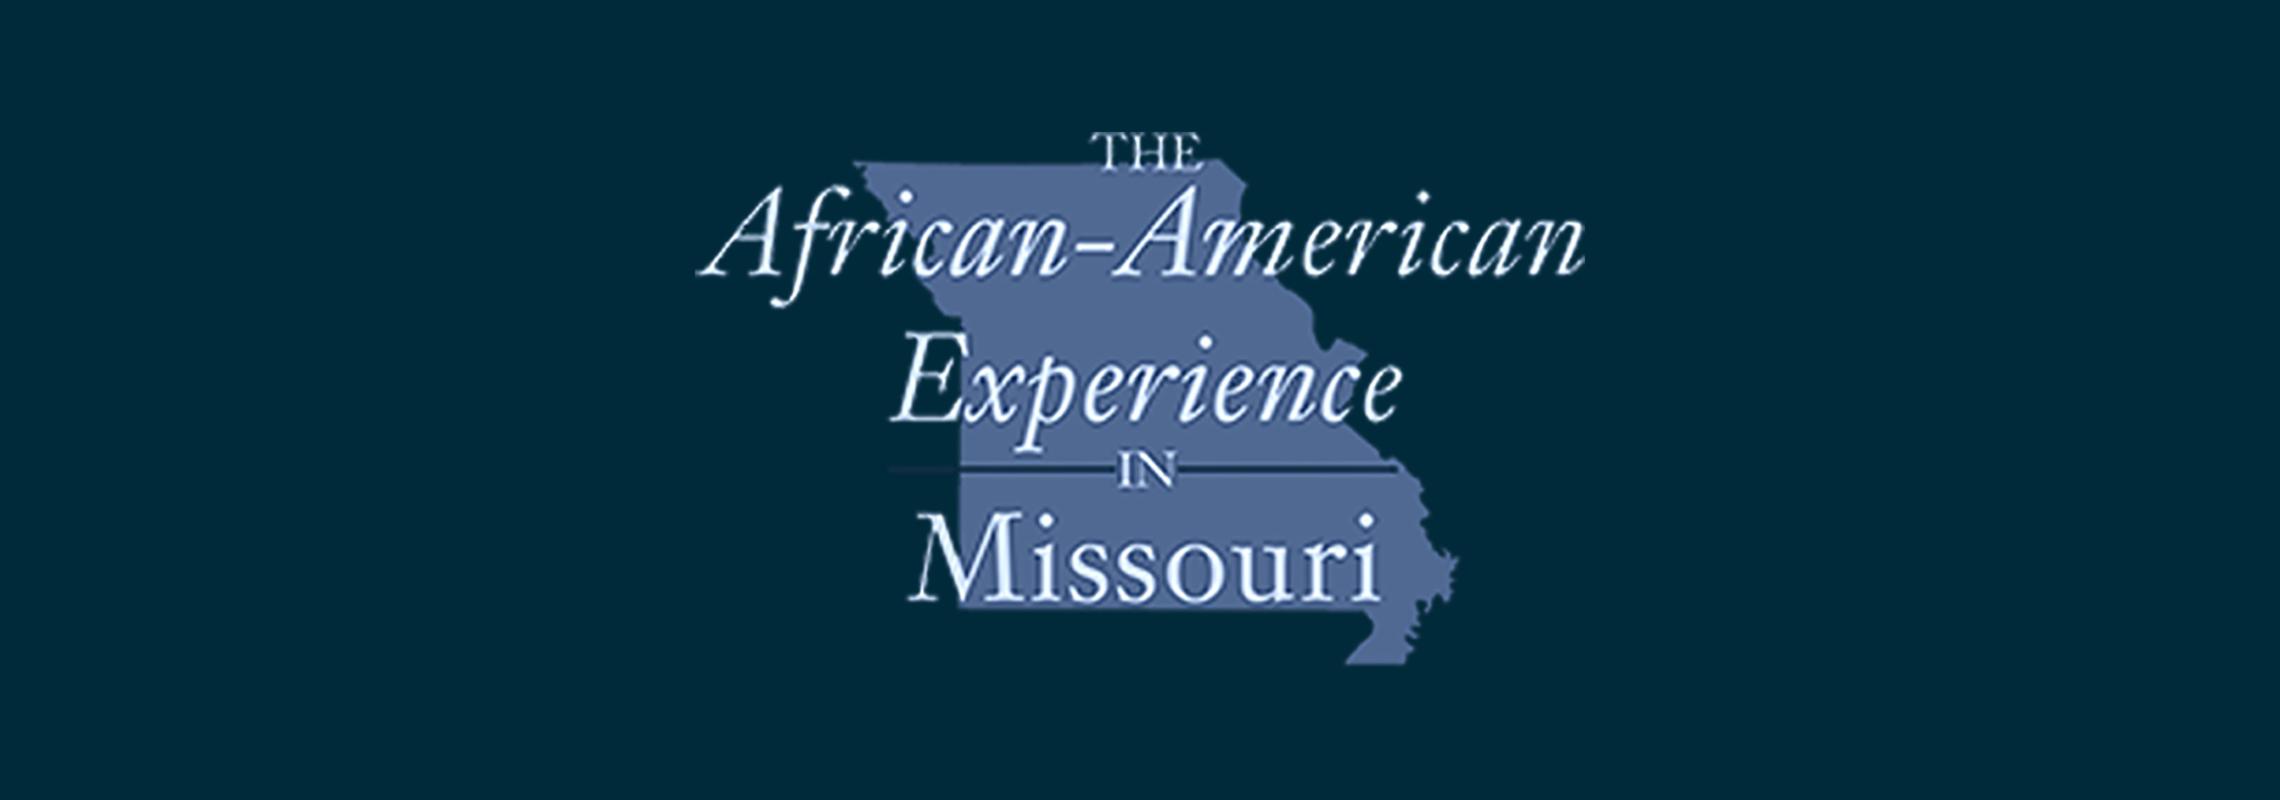 African American Experience in Missouri